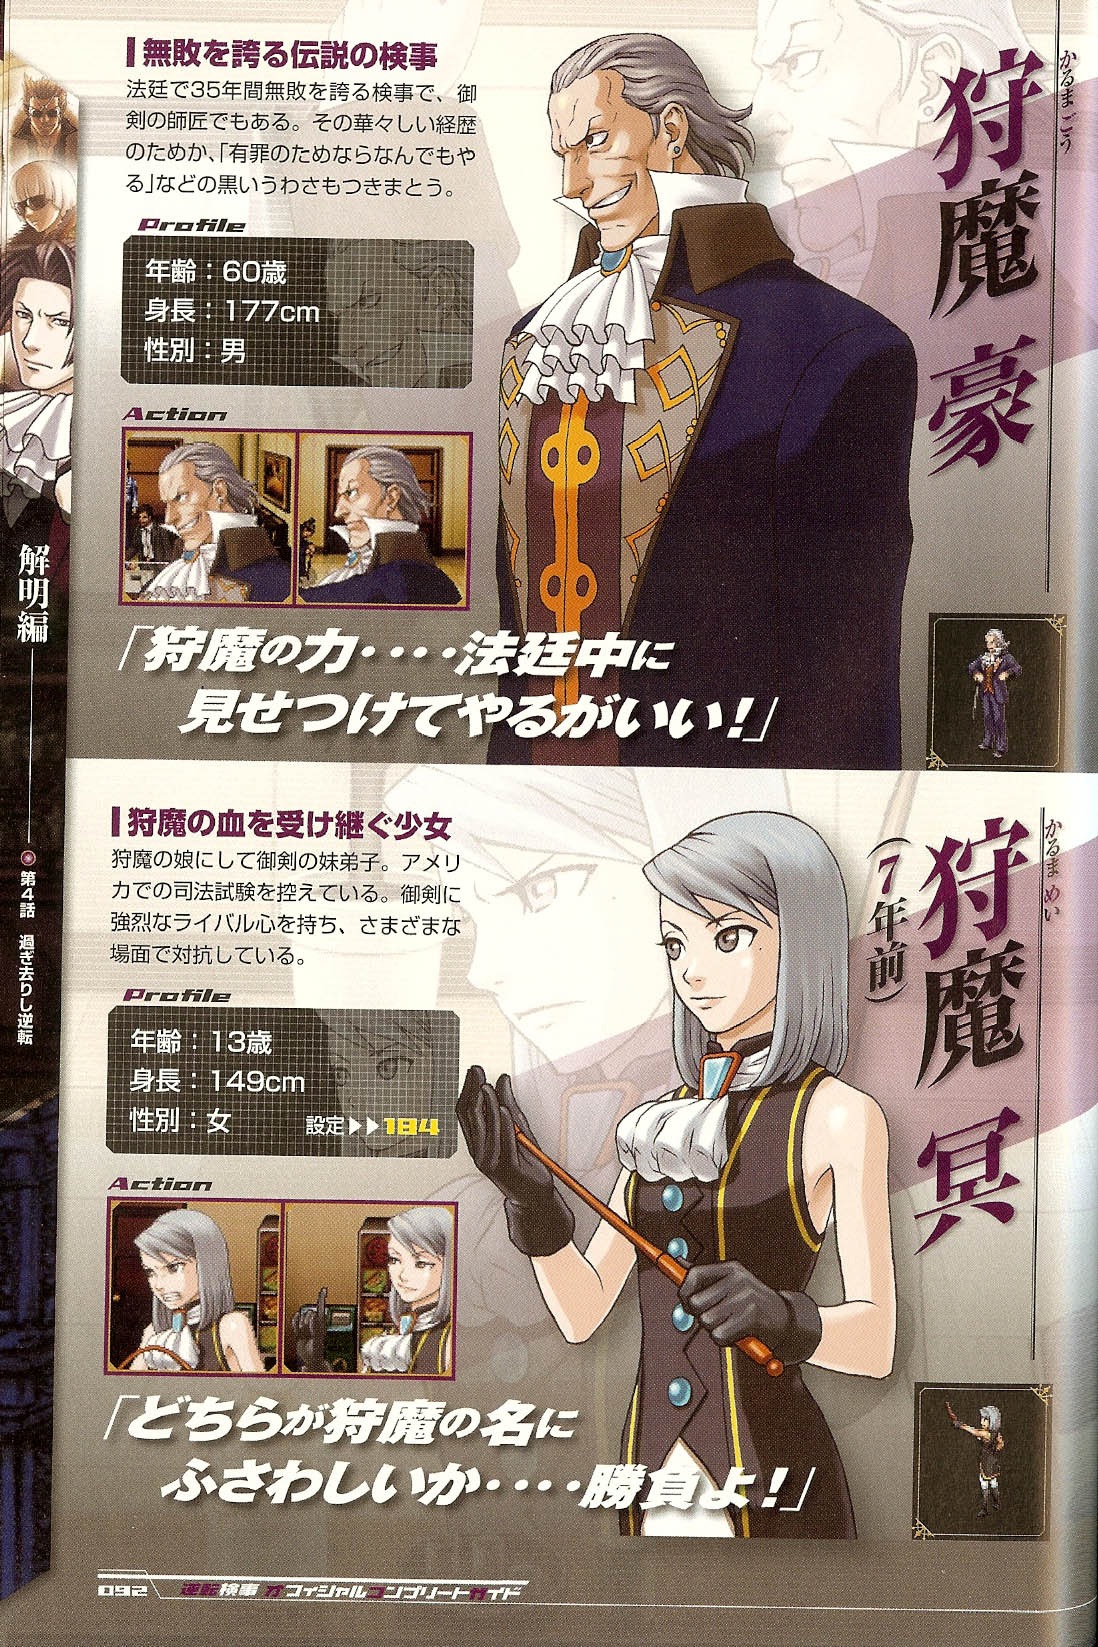 Phoenix Wright: Ace Attorney' gave me an enduring love for character design